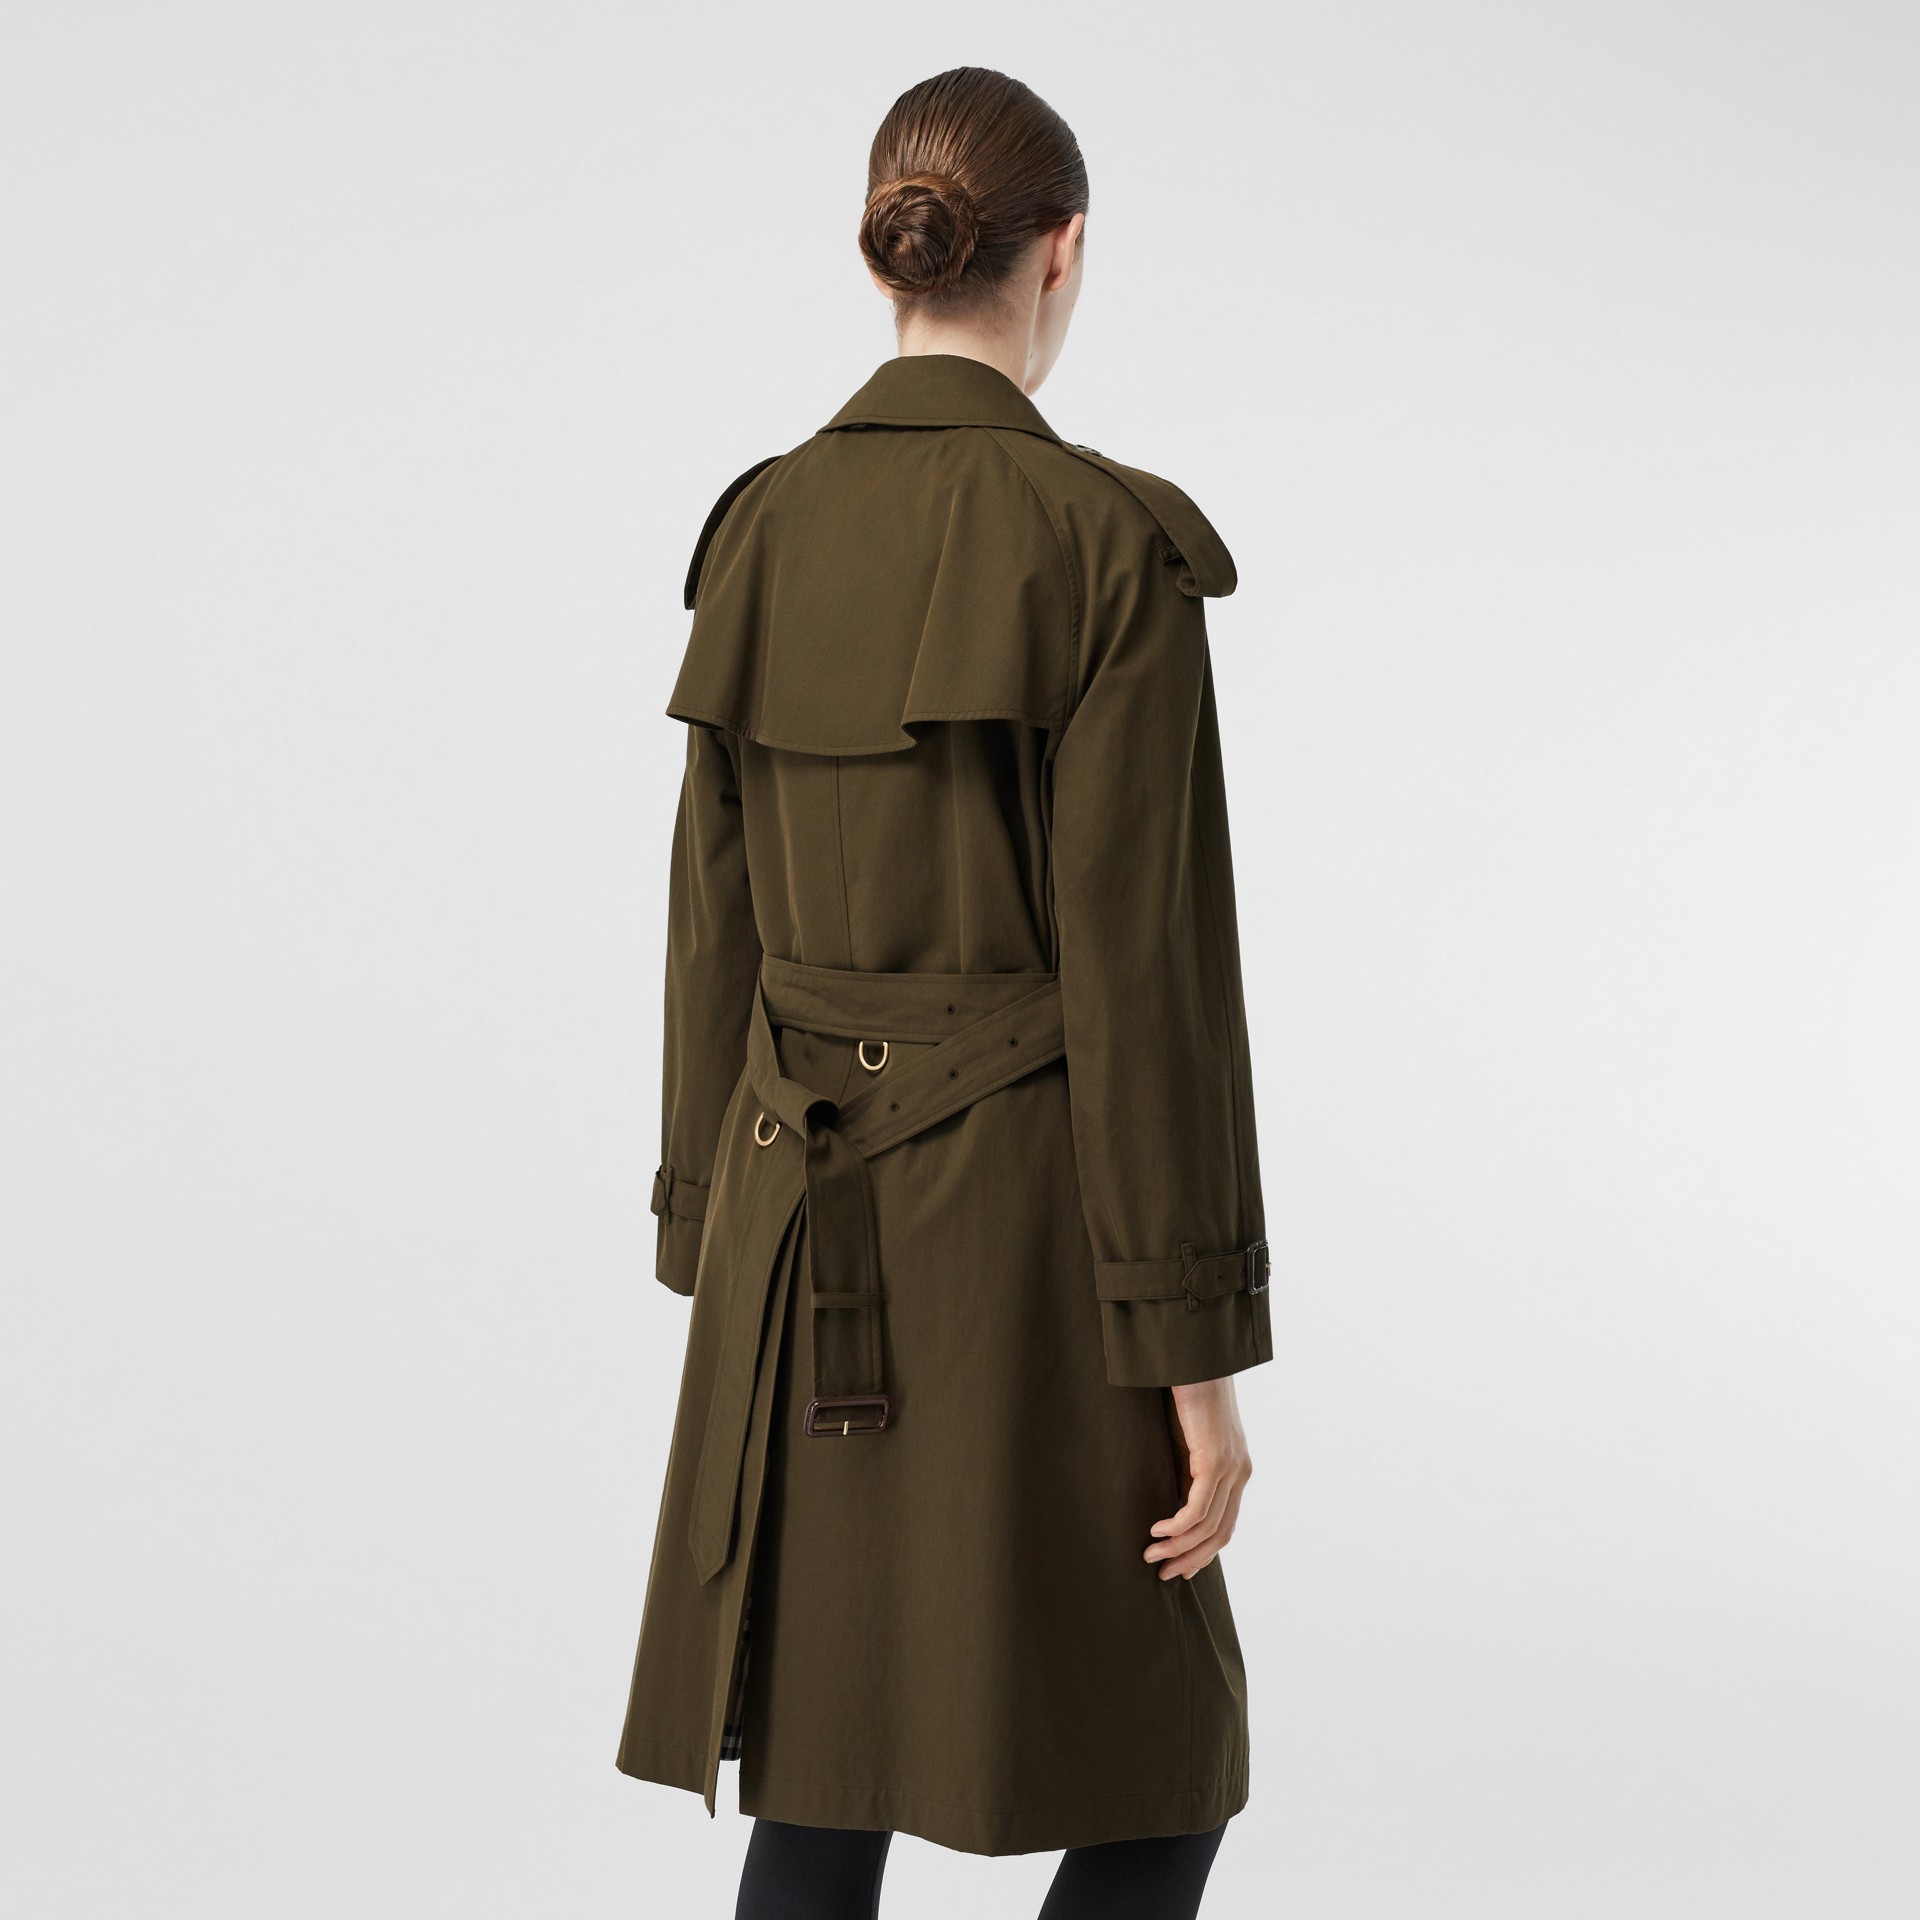 The Mid-length Westminster Heritage Trench Coat in Dark Military Khaki ...